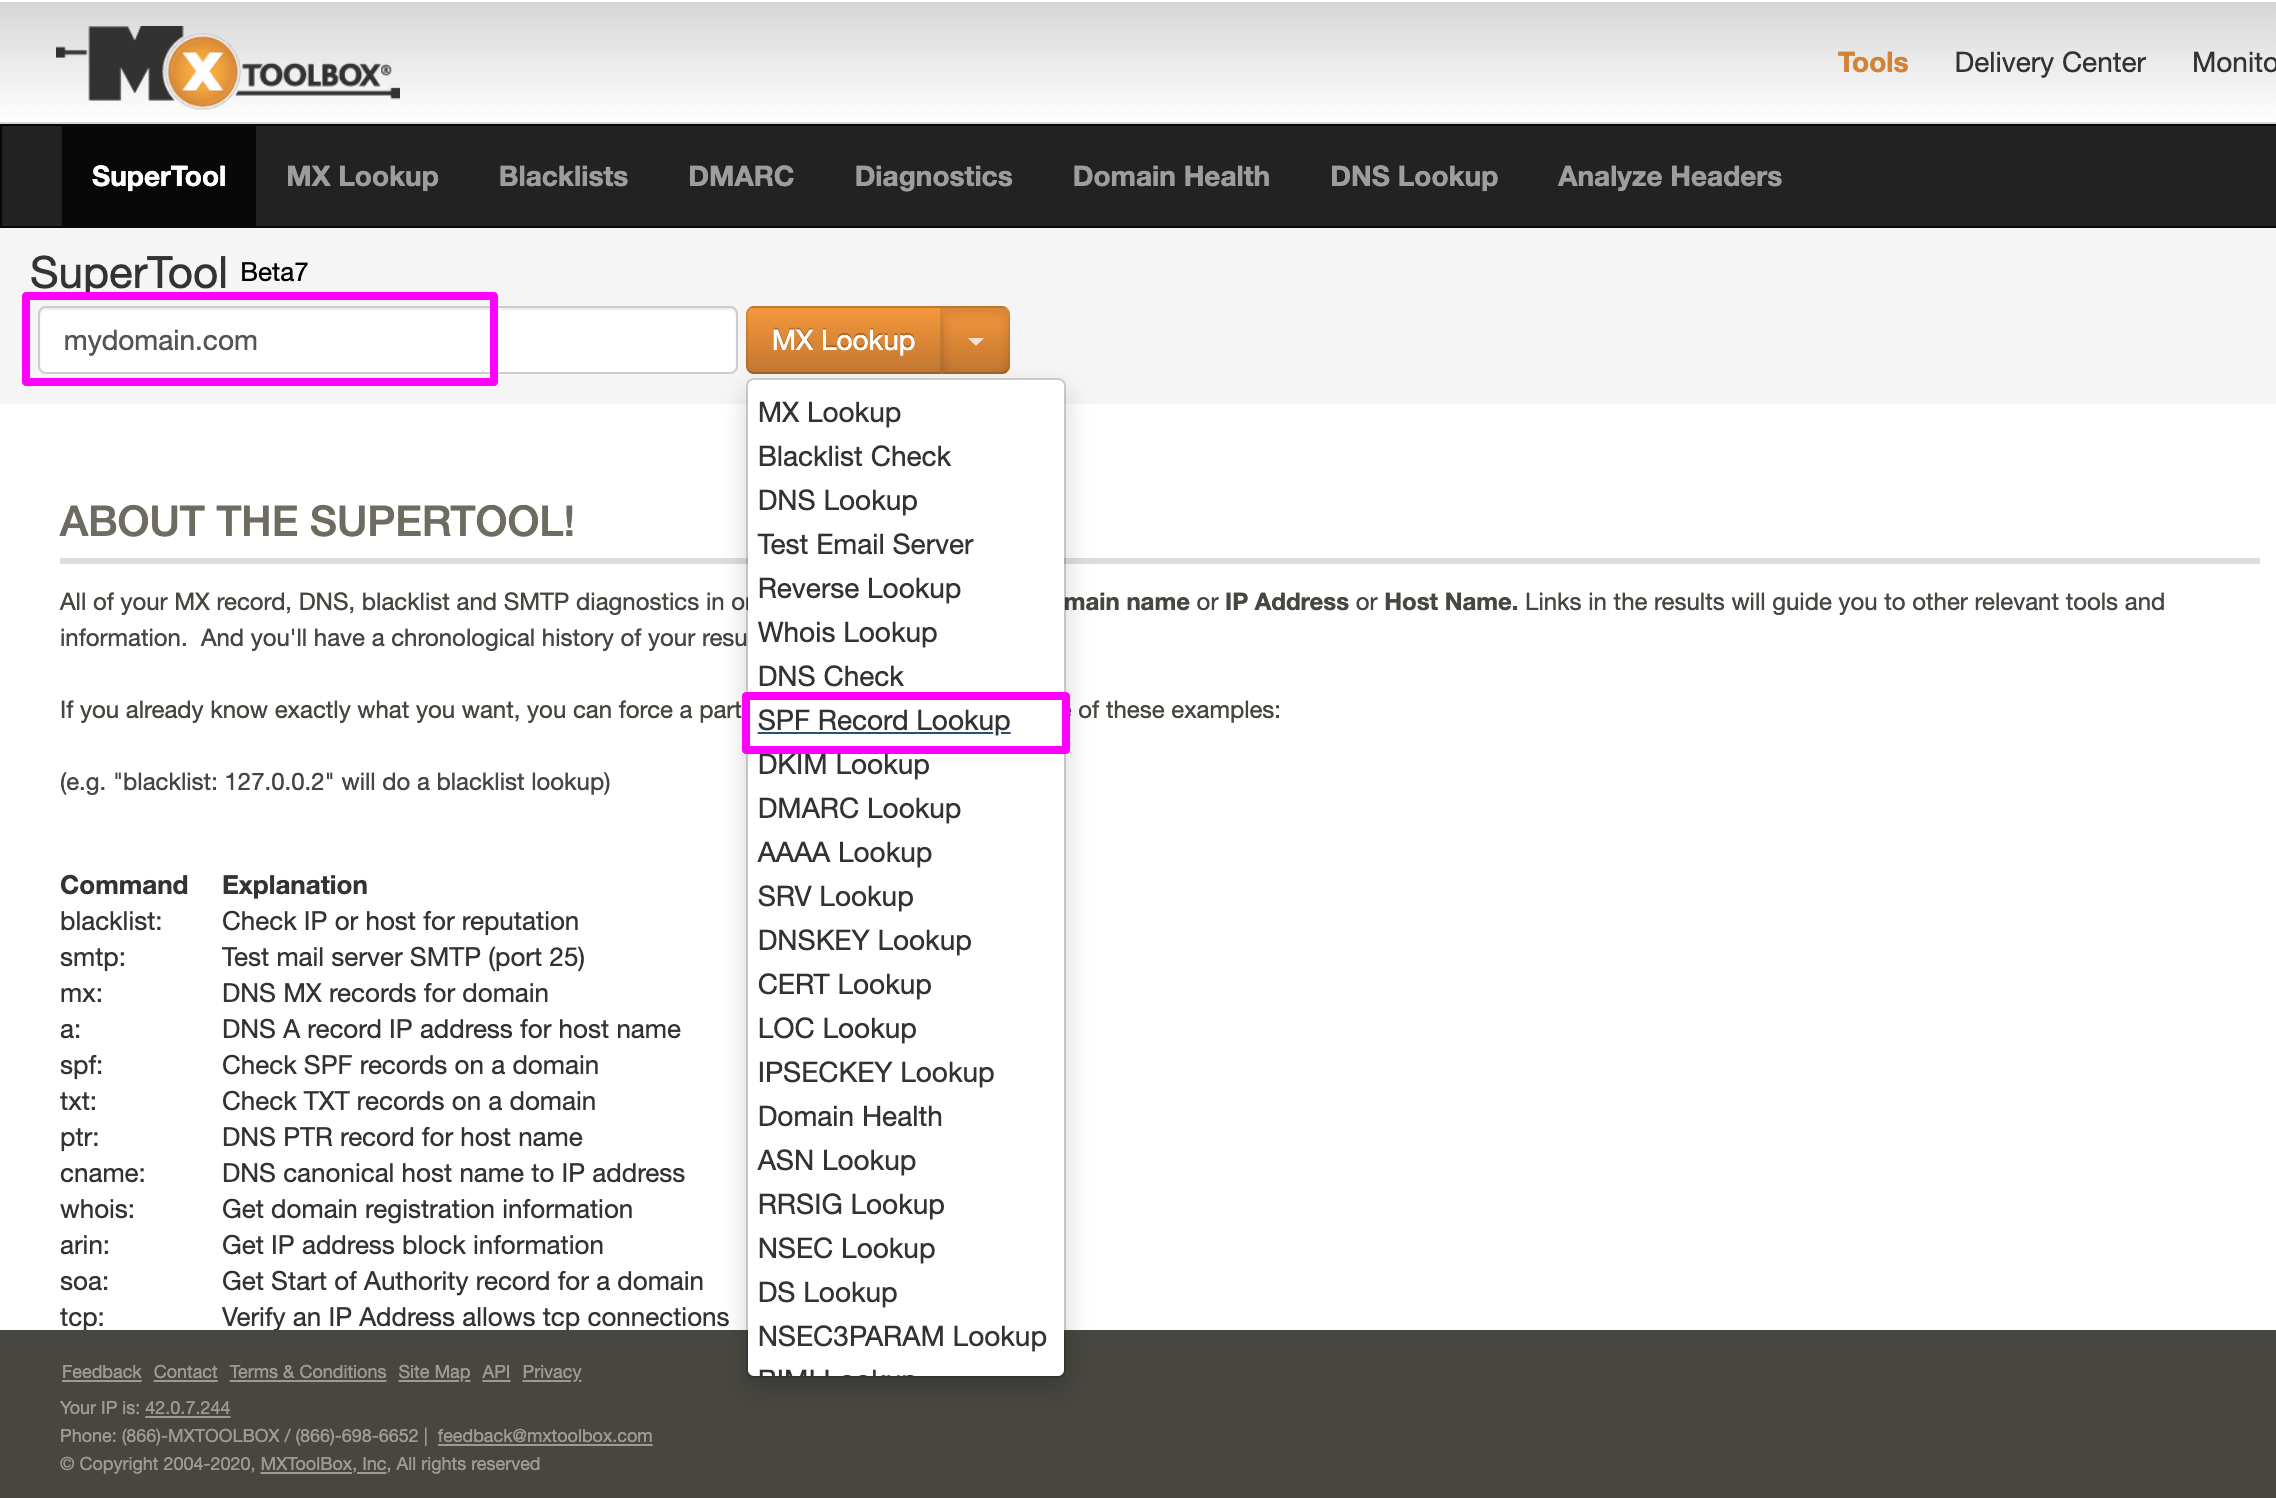 In MxToolbox for SPF verification, entering the domain name and selecting SPF Lookup from the dropdown options.